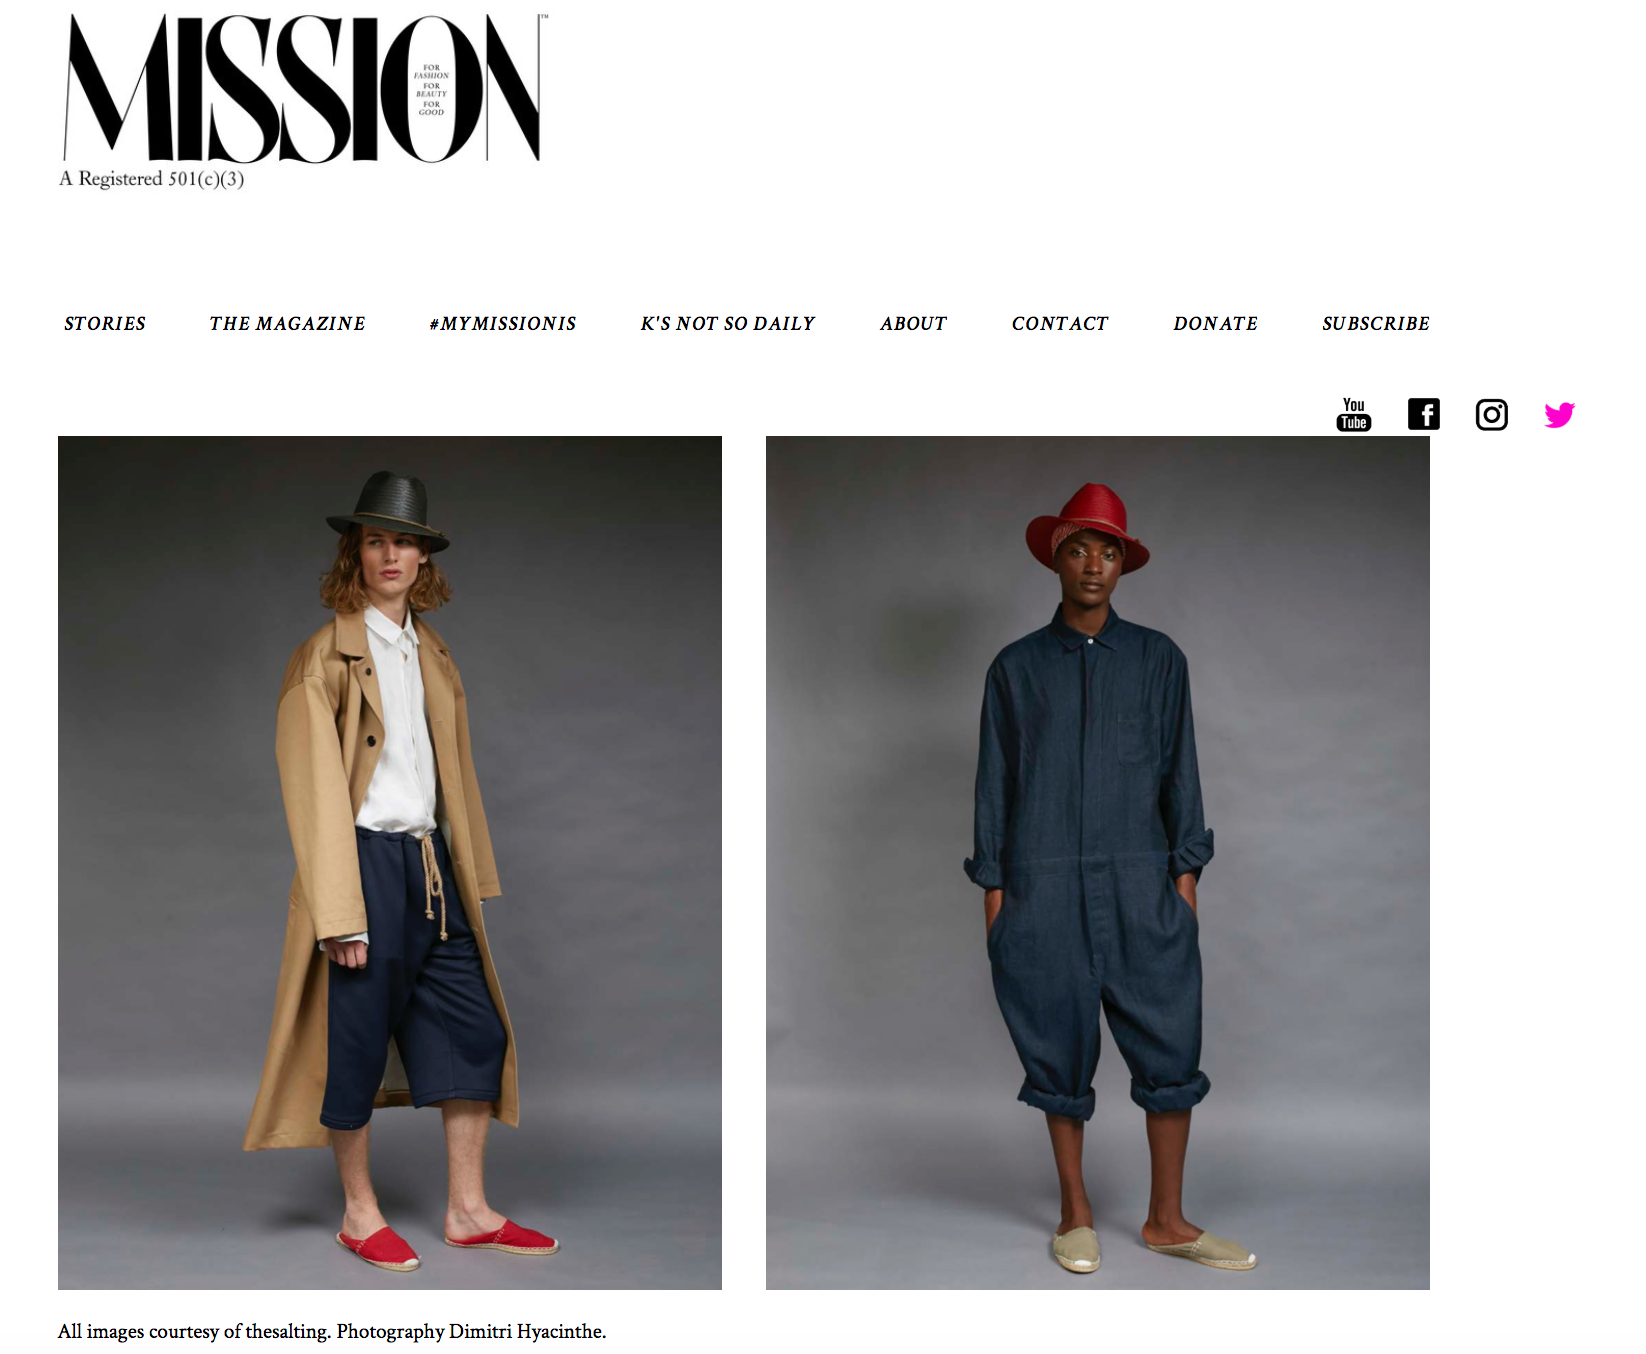 we're featured: mission magazine